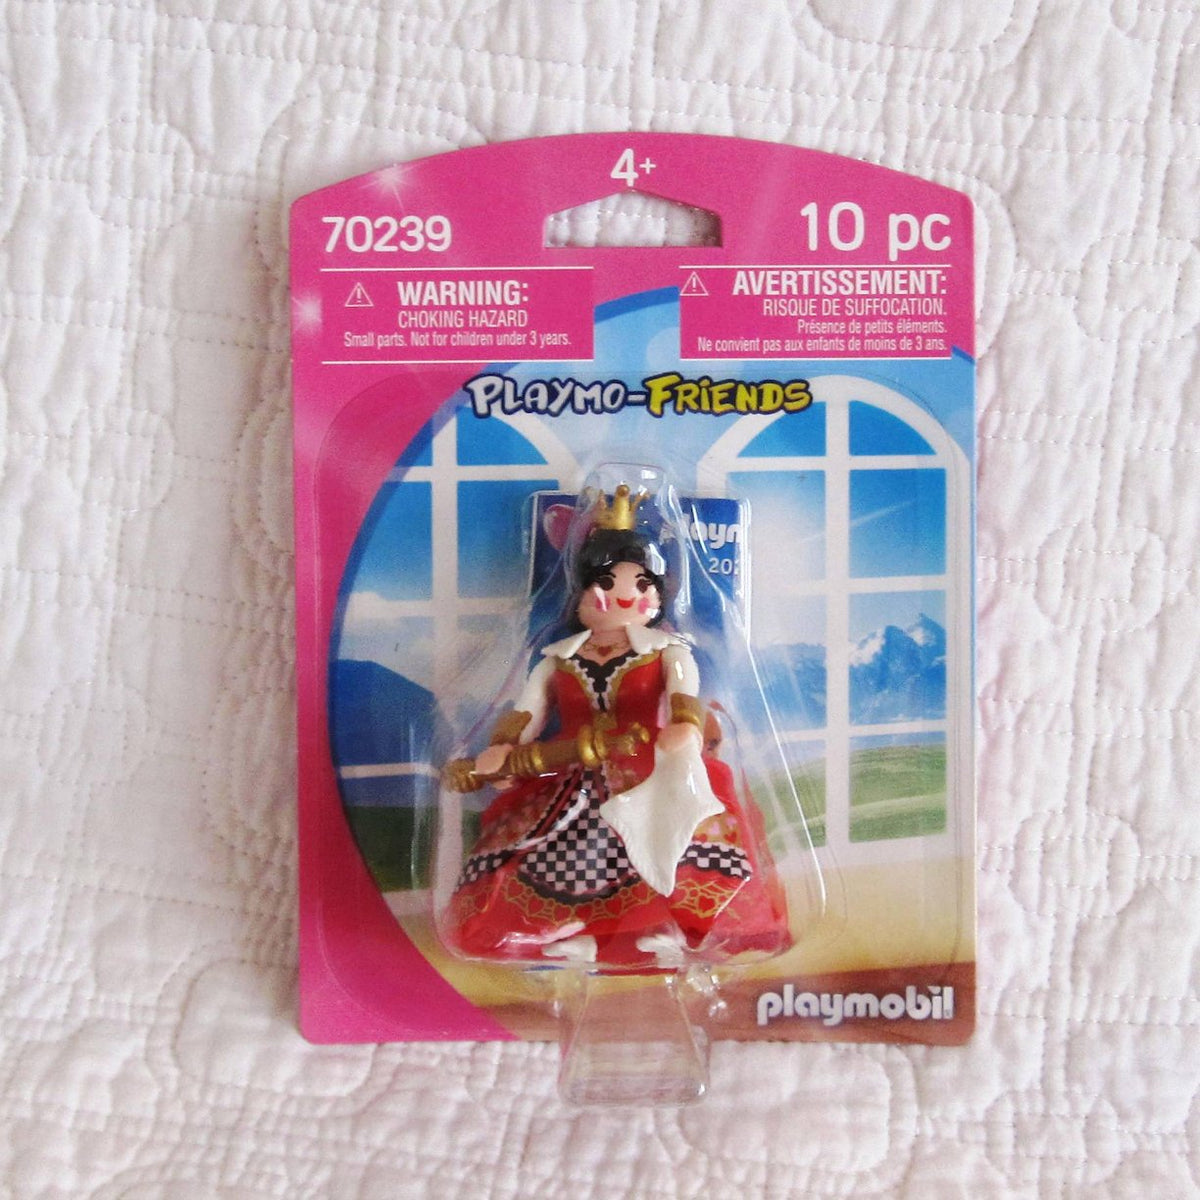 Playmobil "Queen of Hearts" Figure Play Ages 4+ Dragonfly Castle